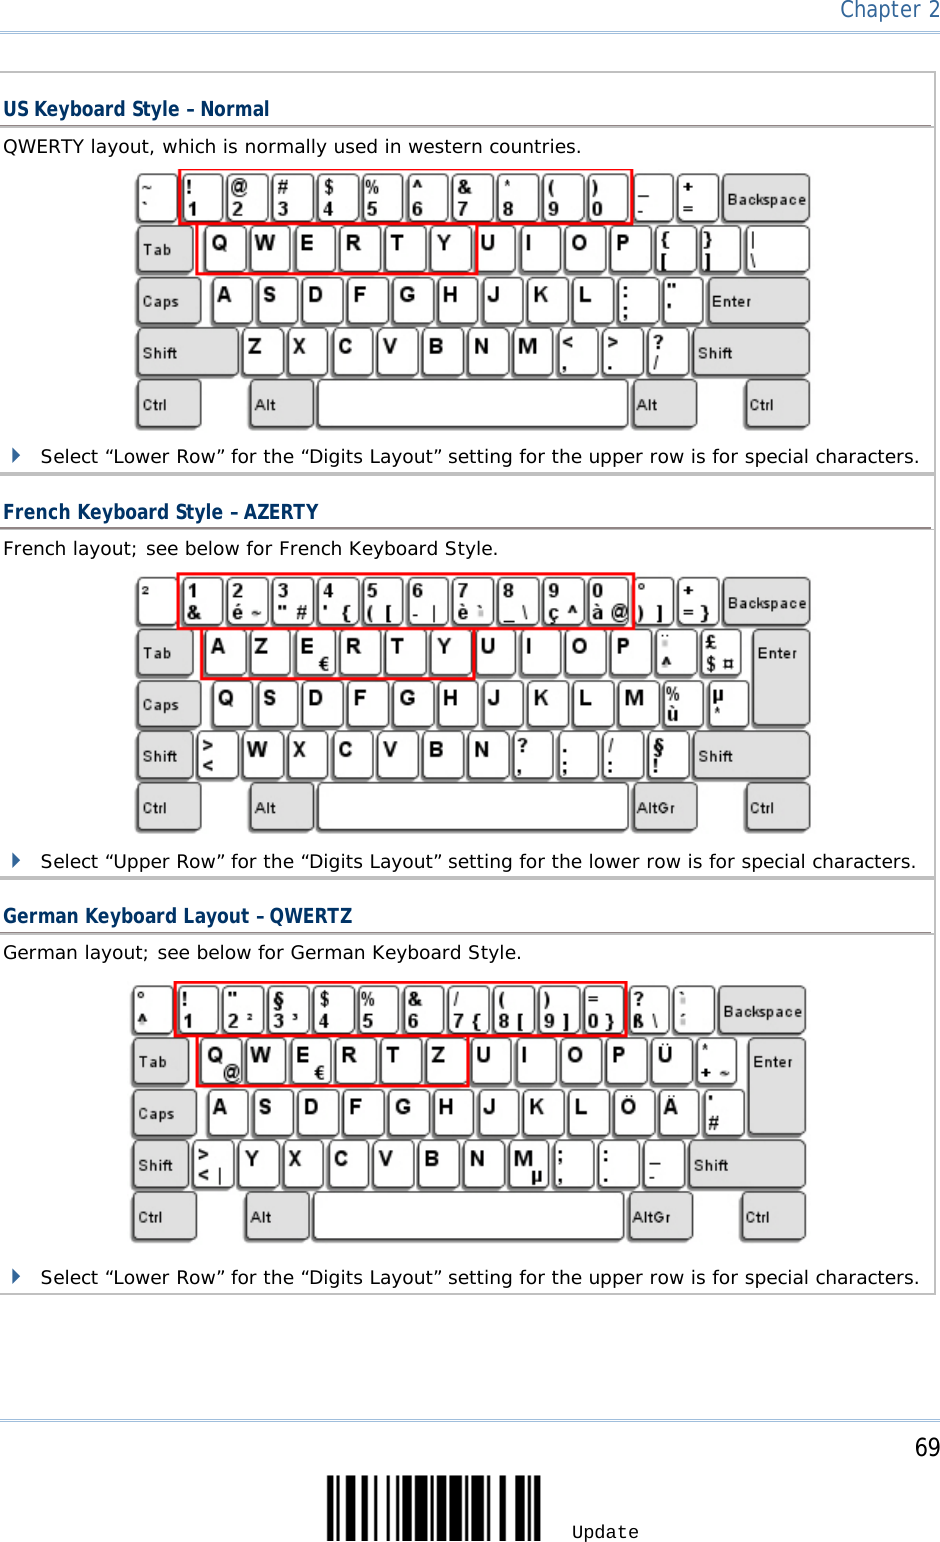     69 Update  Chapter 2    US Keyboard Style – Normal QWERTY layout, which is normally used in western countries.                  Select “Lower Row” for the “Digits Layout” setting for the upper row is for special characters.  French Keyboard Style – AZERTY French layout; see below for French Keyboard Style.                  Select “Upper Row” for the “Digits Layout” setting for the lower row is for special characters.  German Keyboard Layout – QWERTZ German layout; see below for German Keyboard Style.                Select “Lower Row” for the “Digits Layout” setting for the upper row is for special characters.     